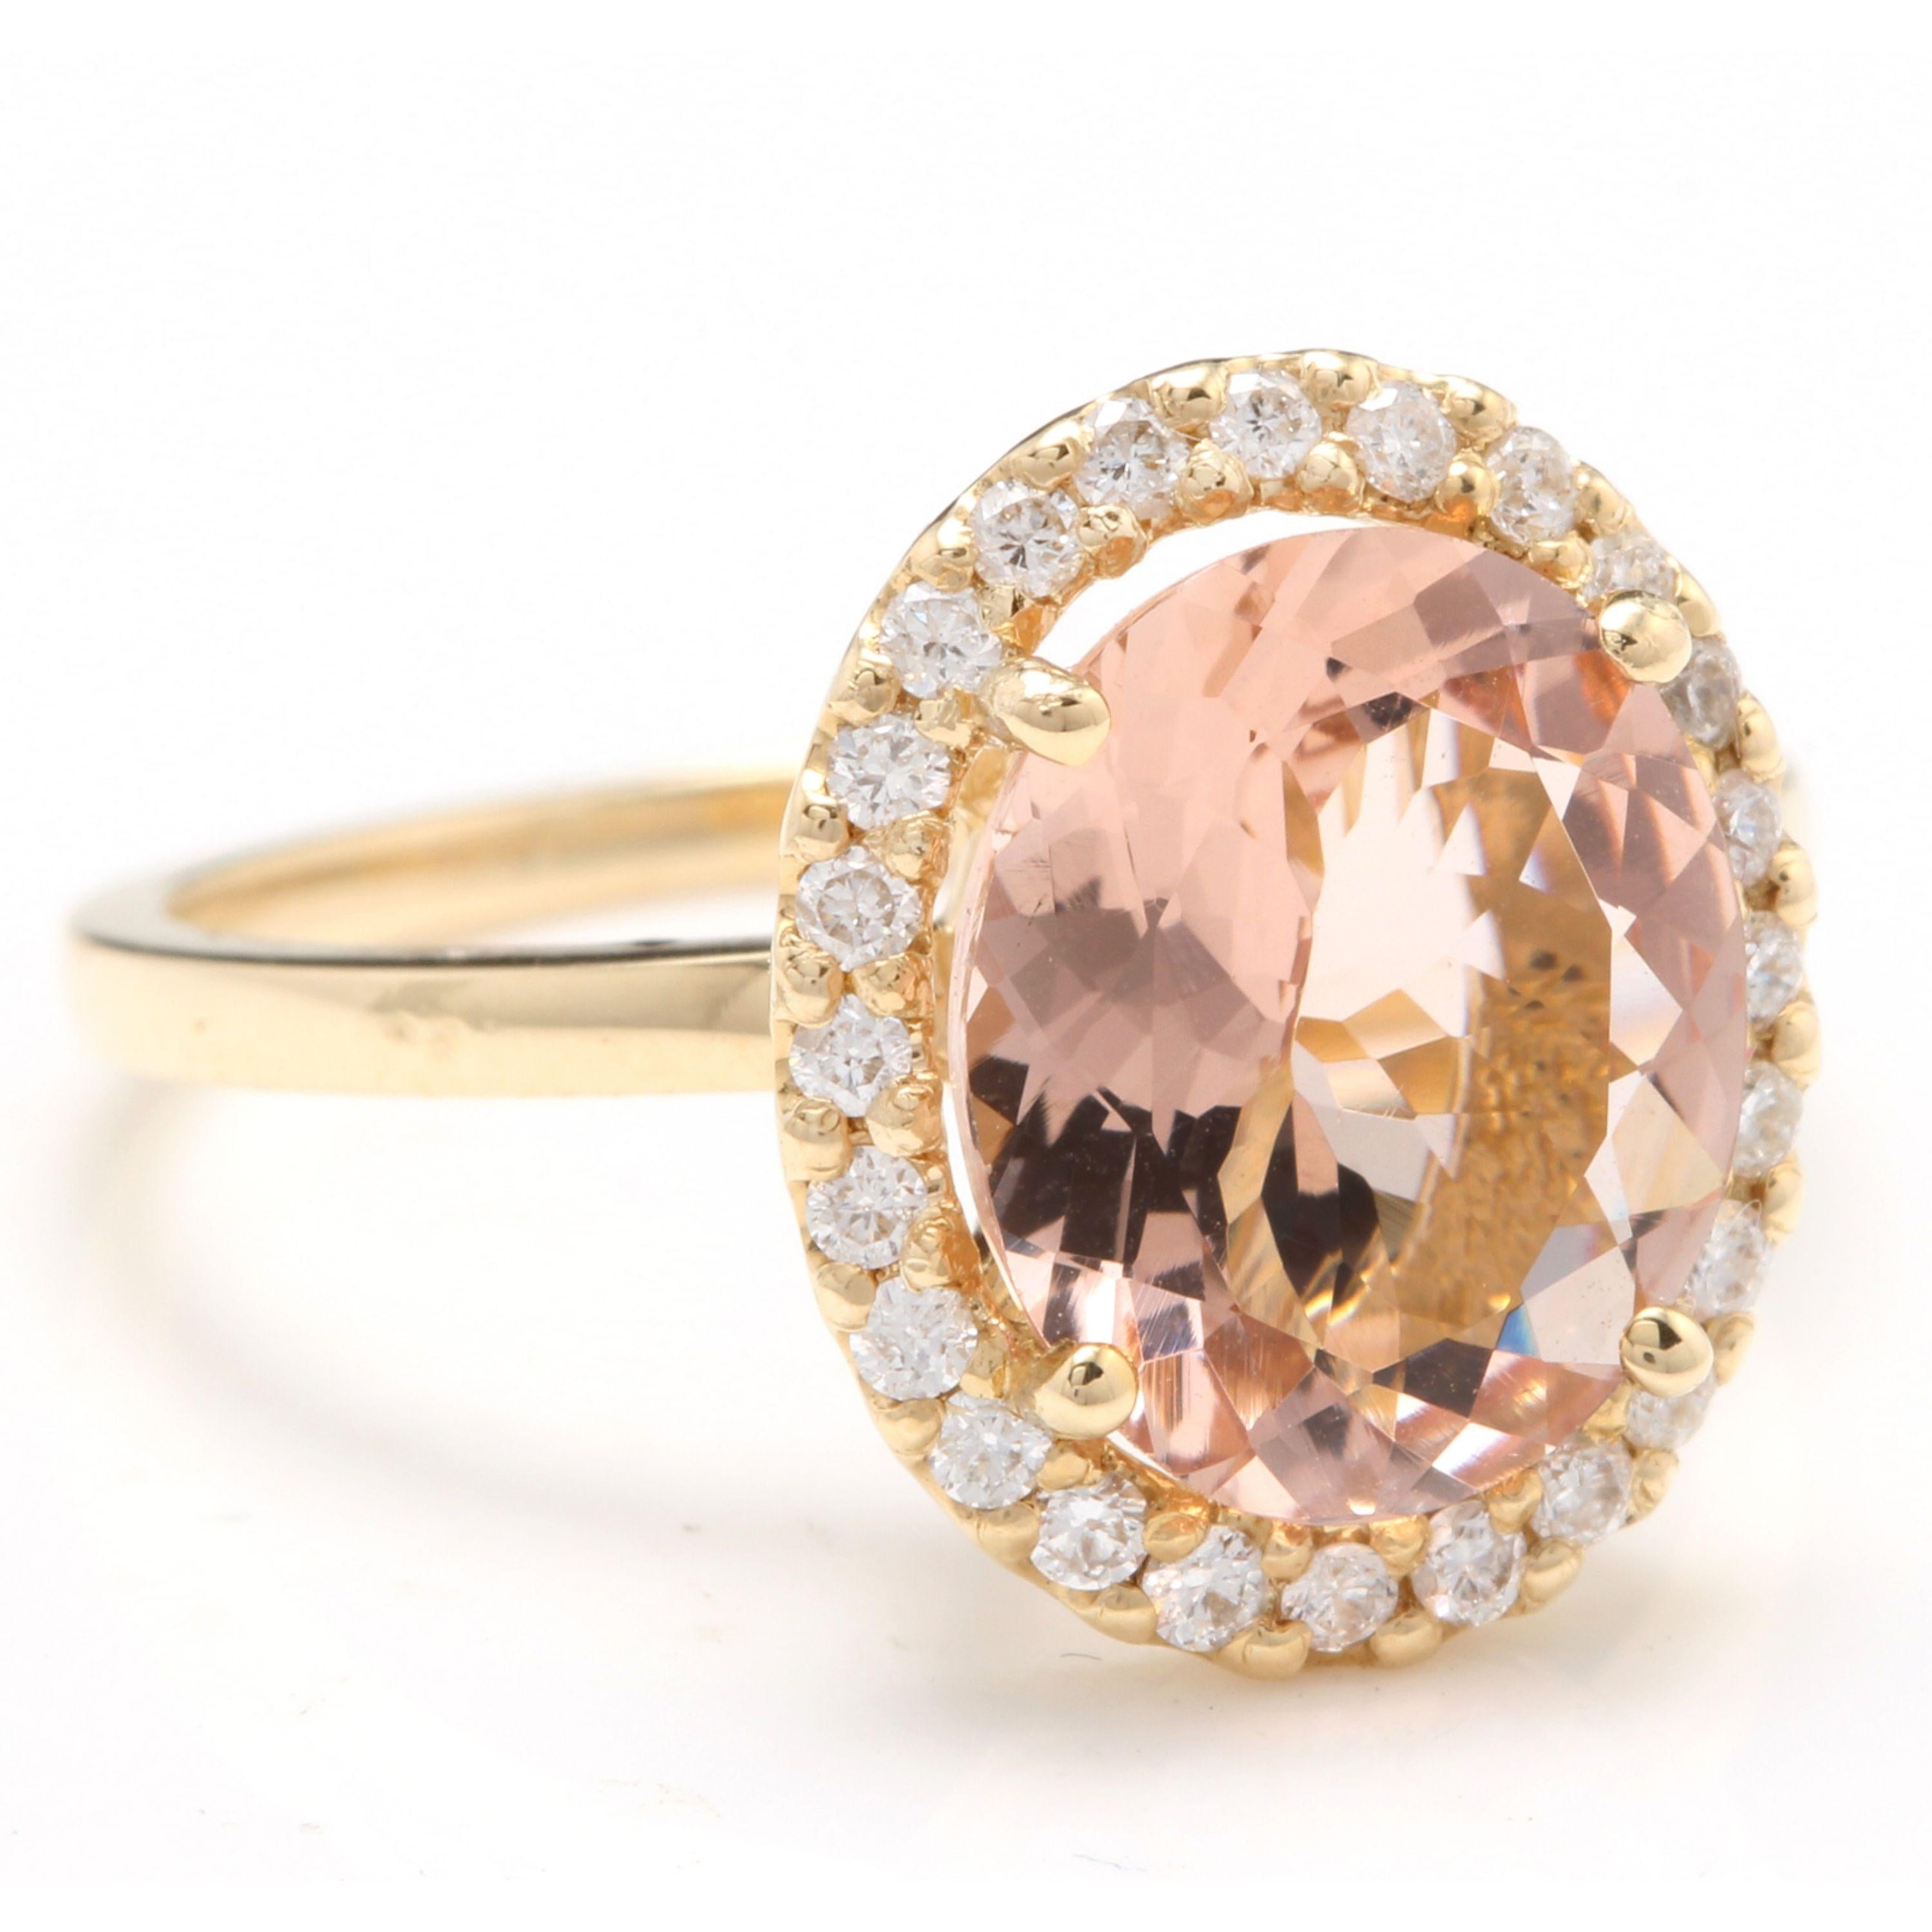 3.30 Carats Impressive Natural Morganite and Diamond 14K Solid Yellow Gold Ring

Total Morganite Weight is: Approx. 3.00 Carats

Morganite Treatment: Heating

Morganite Measures: Approx. 11.00 x 9.00mm

Natural Round Diamonds Weight: Approx. 0.30